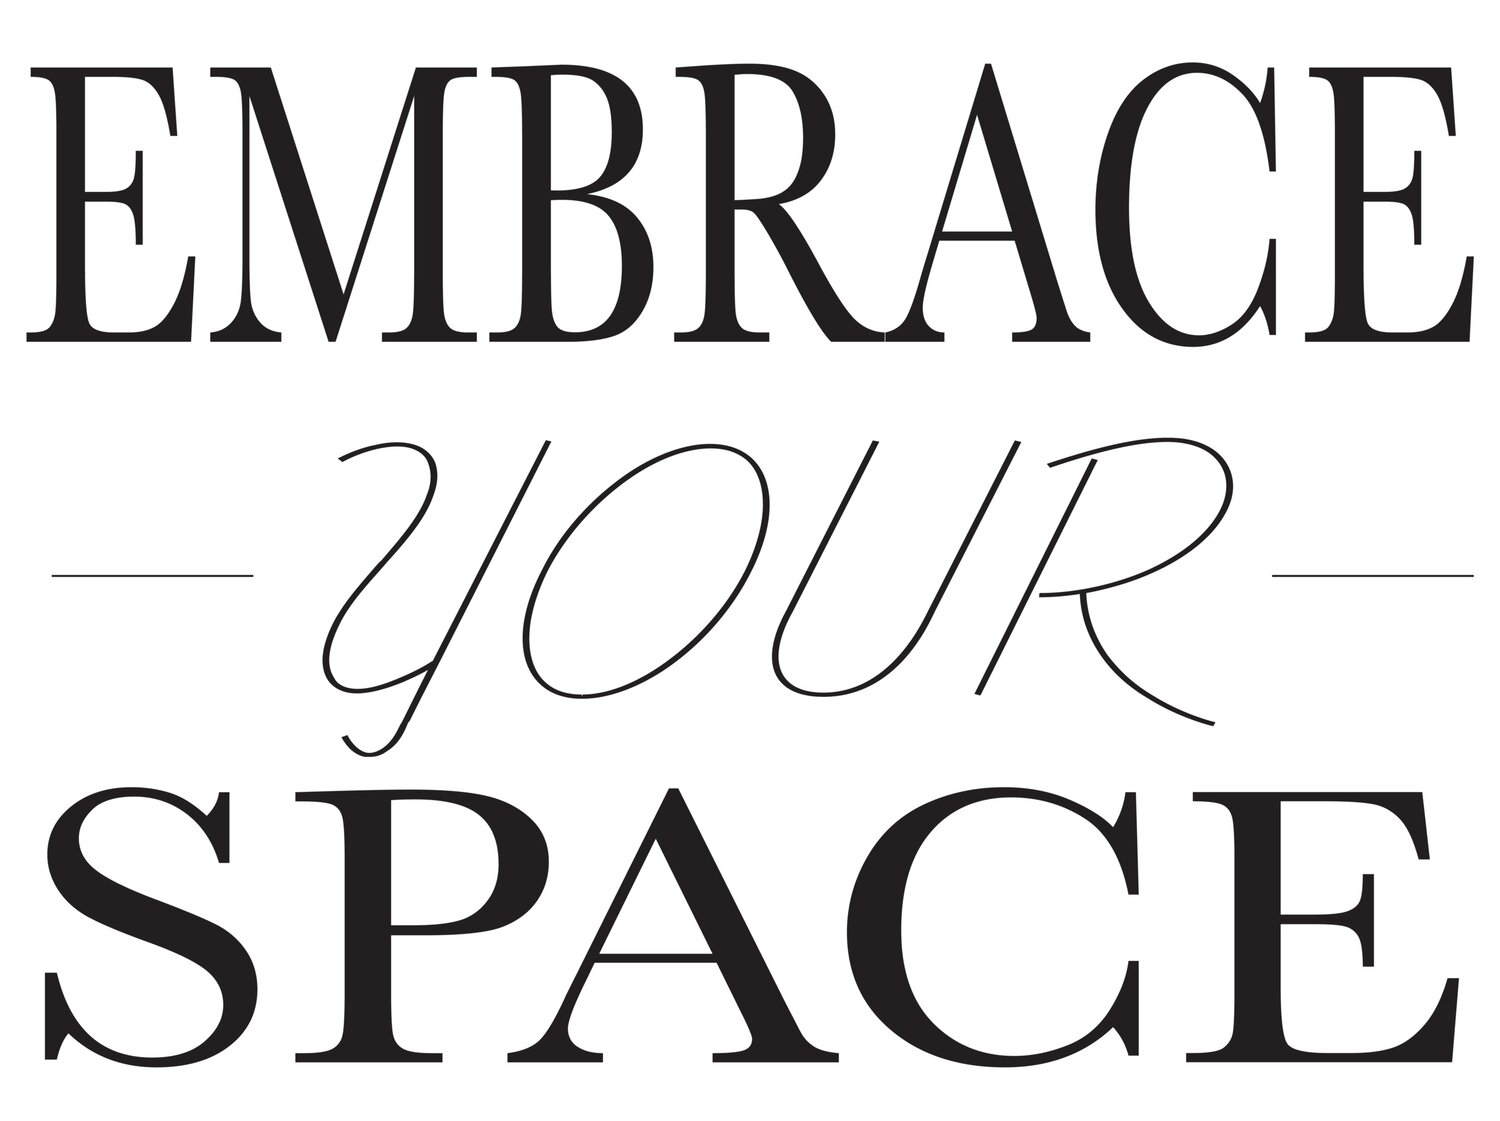 Embrace Your Space